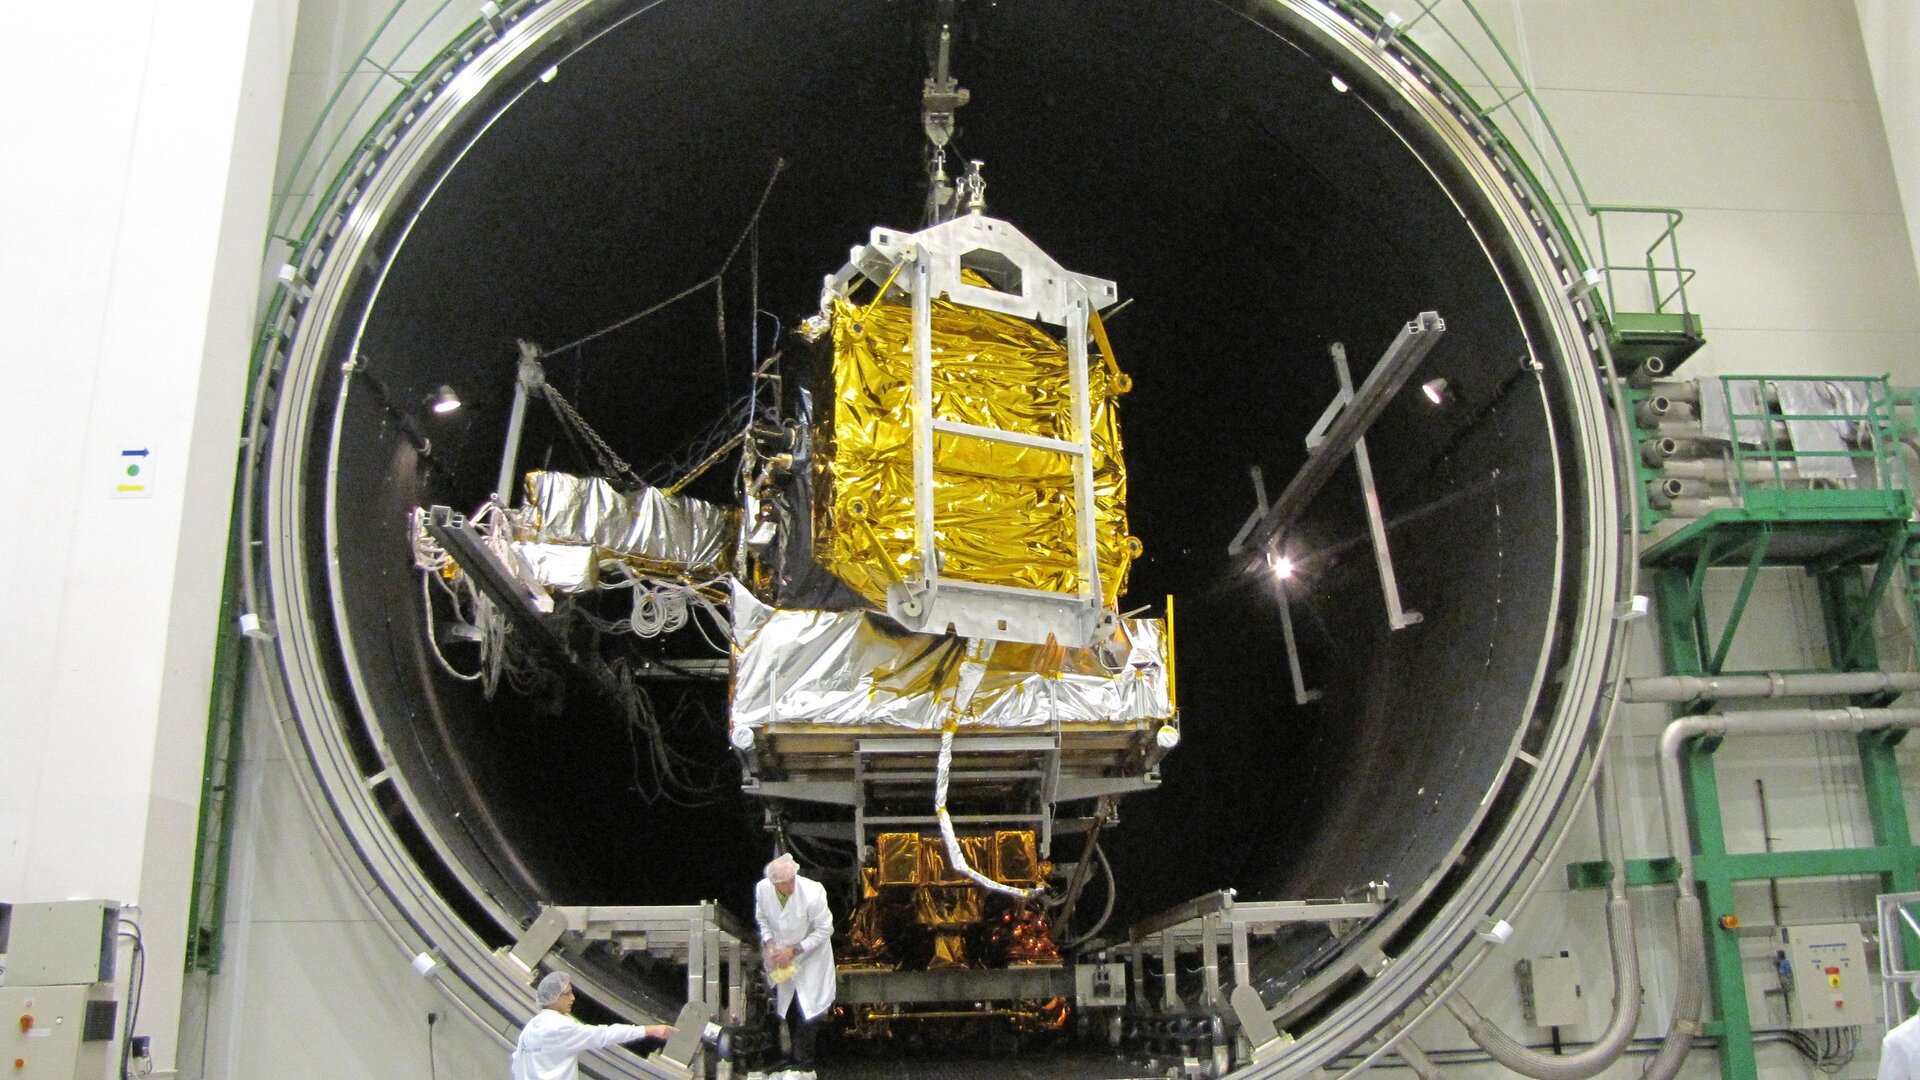 Inside the Intespace Simmer vacuum chamber